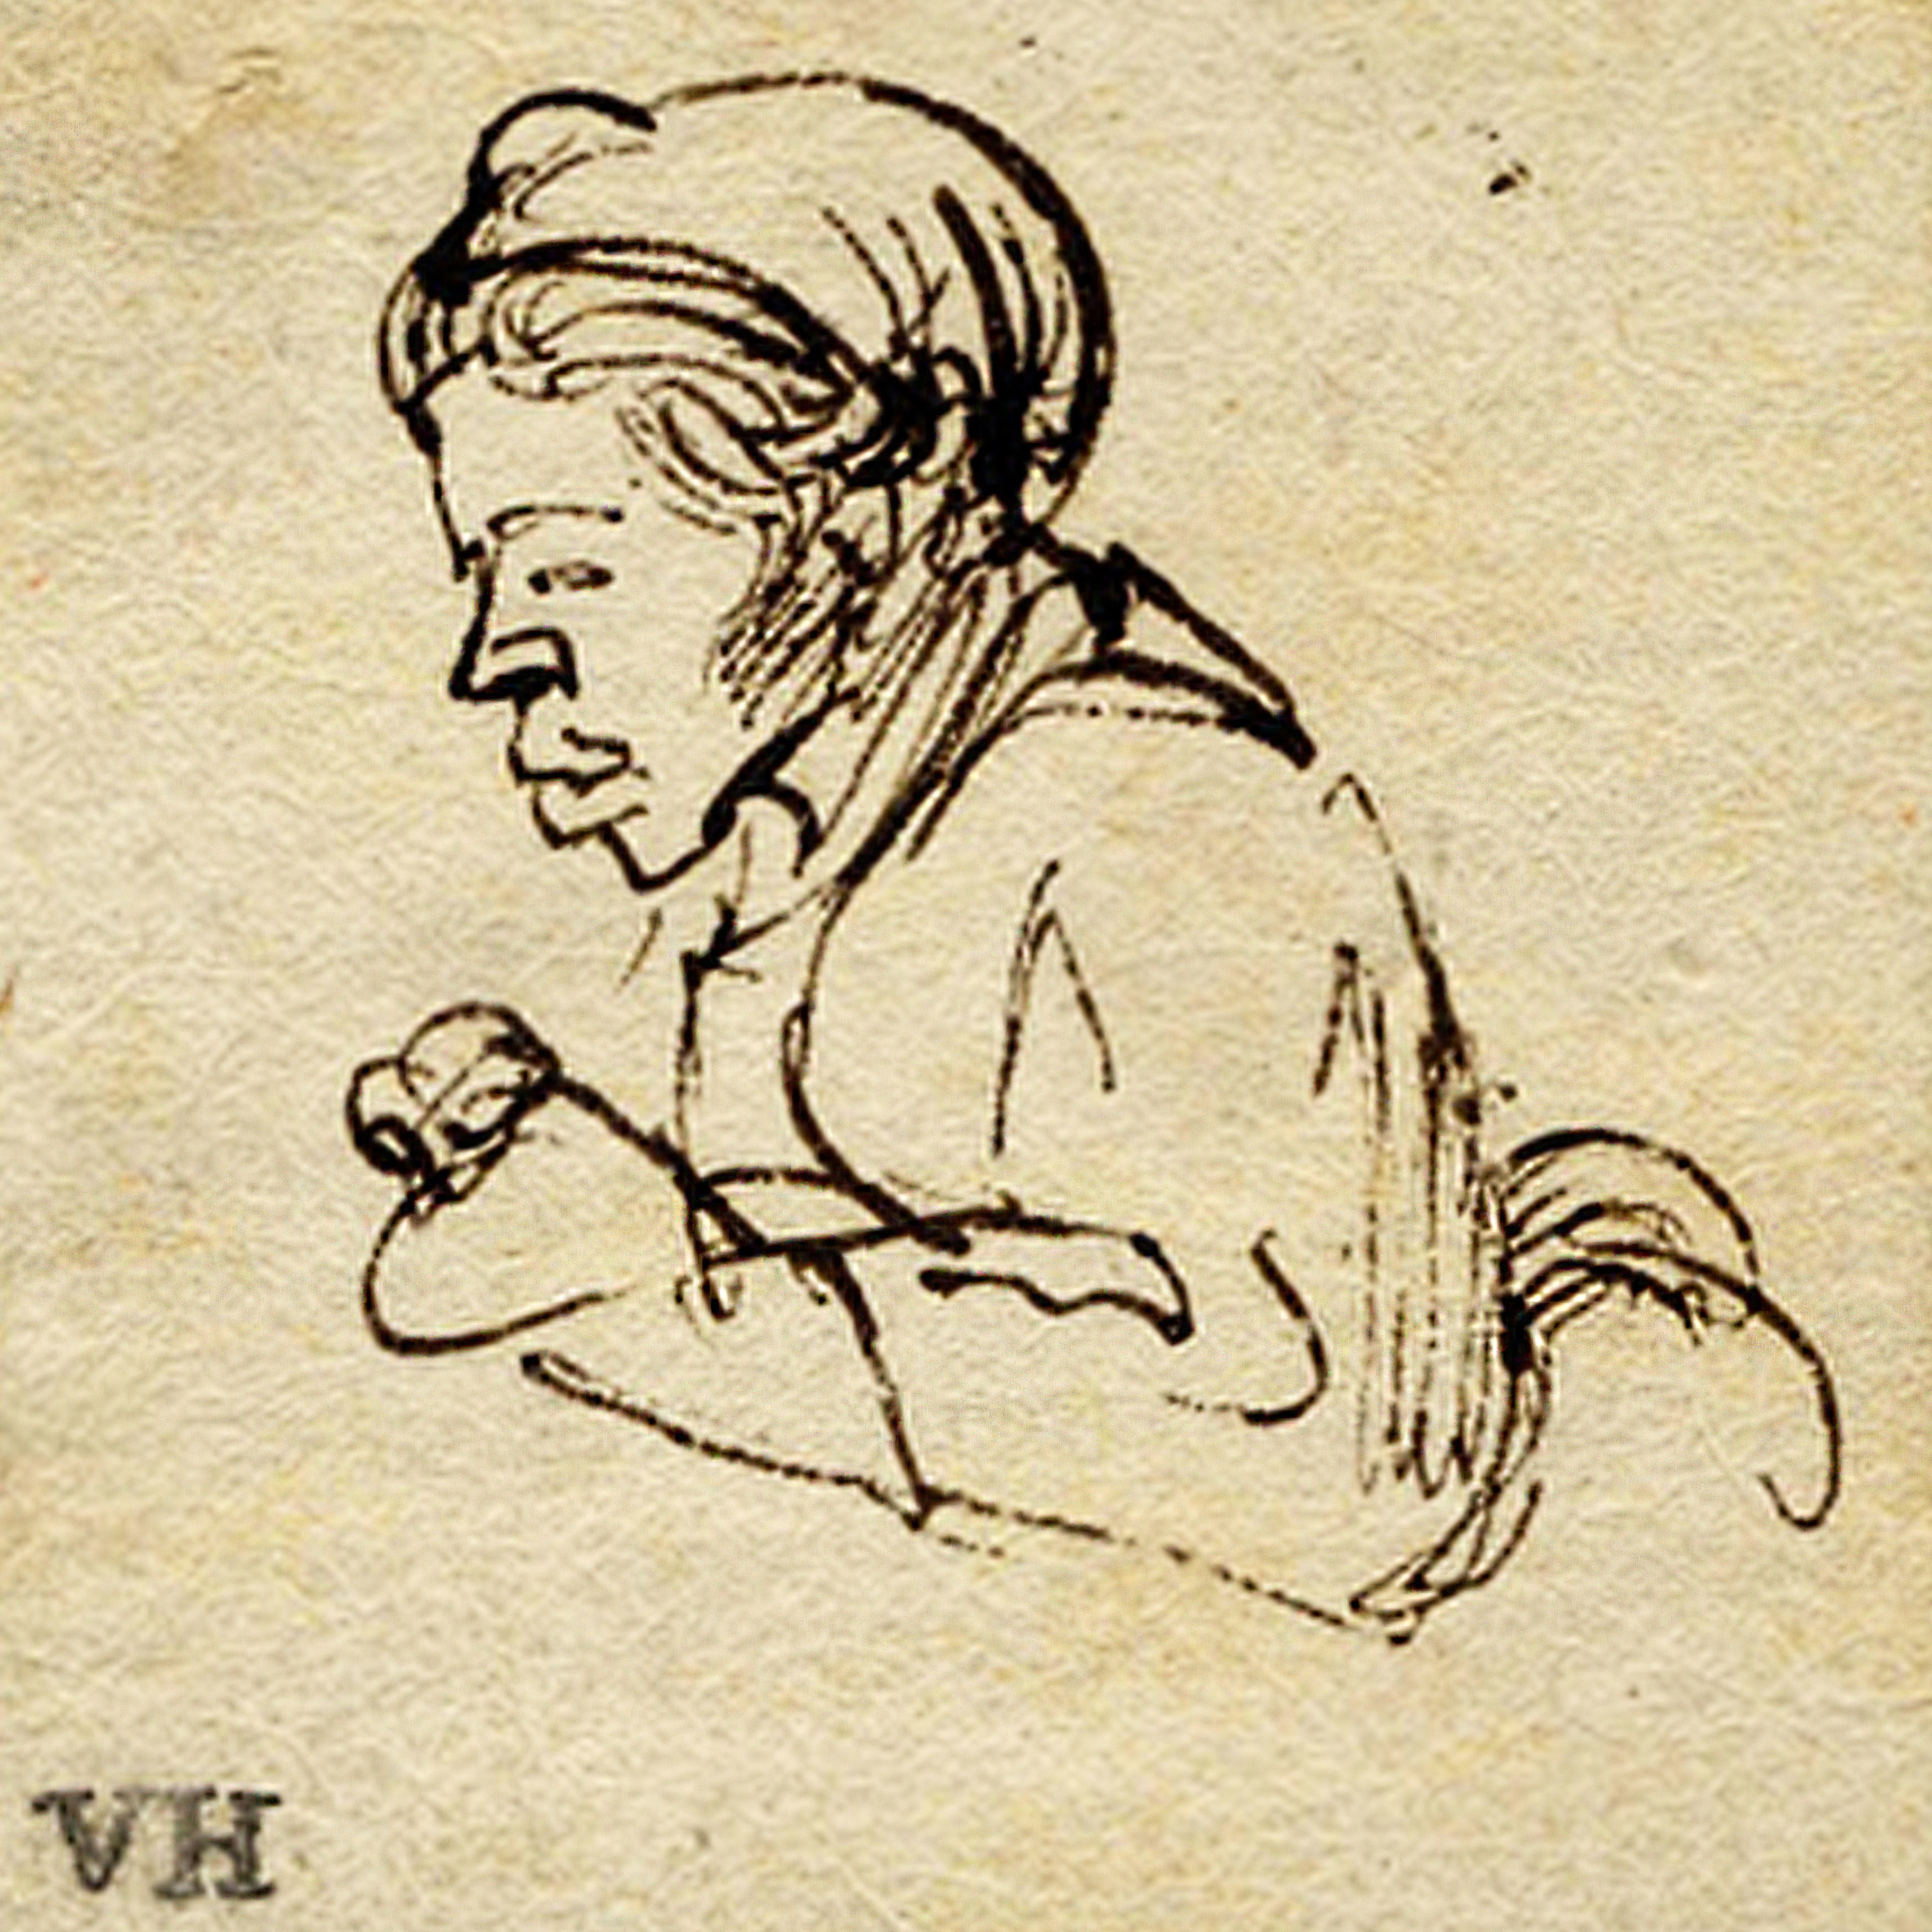 Rembrandt van Rijn, Dutch, 1606 ñ 1669: Study of a West African Woman, c. 1633-1635; pen in dark brown ink; 2-1/8 x 2 in. Ackland Art Museum, The University of North Carolina at Chapel Hill, The Peck Collection.